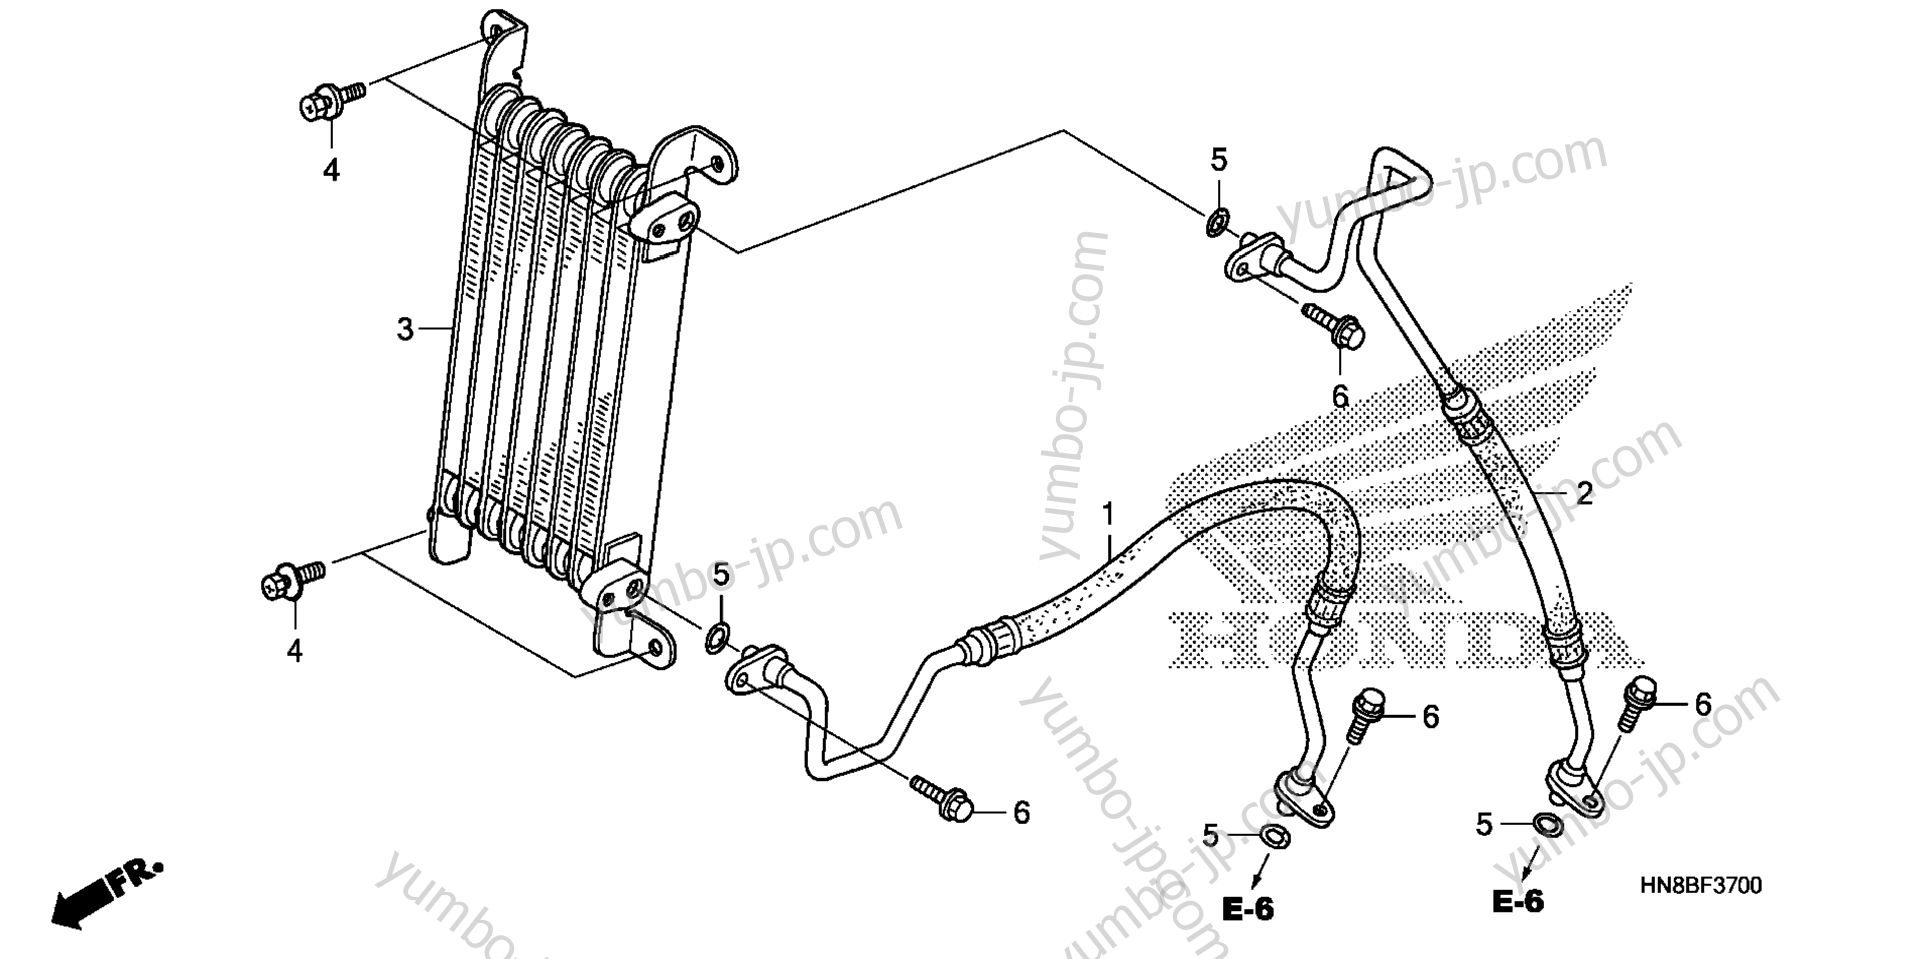 OIL COOLER for ATVs HONDA TRX680FA A 2012 year